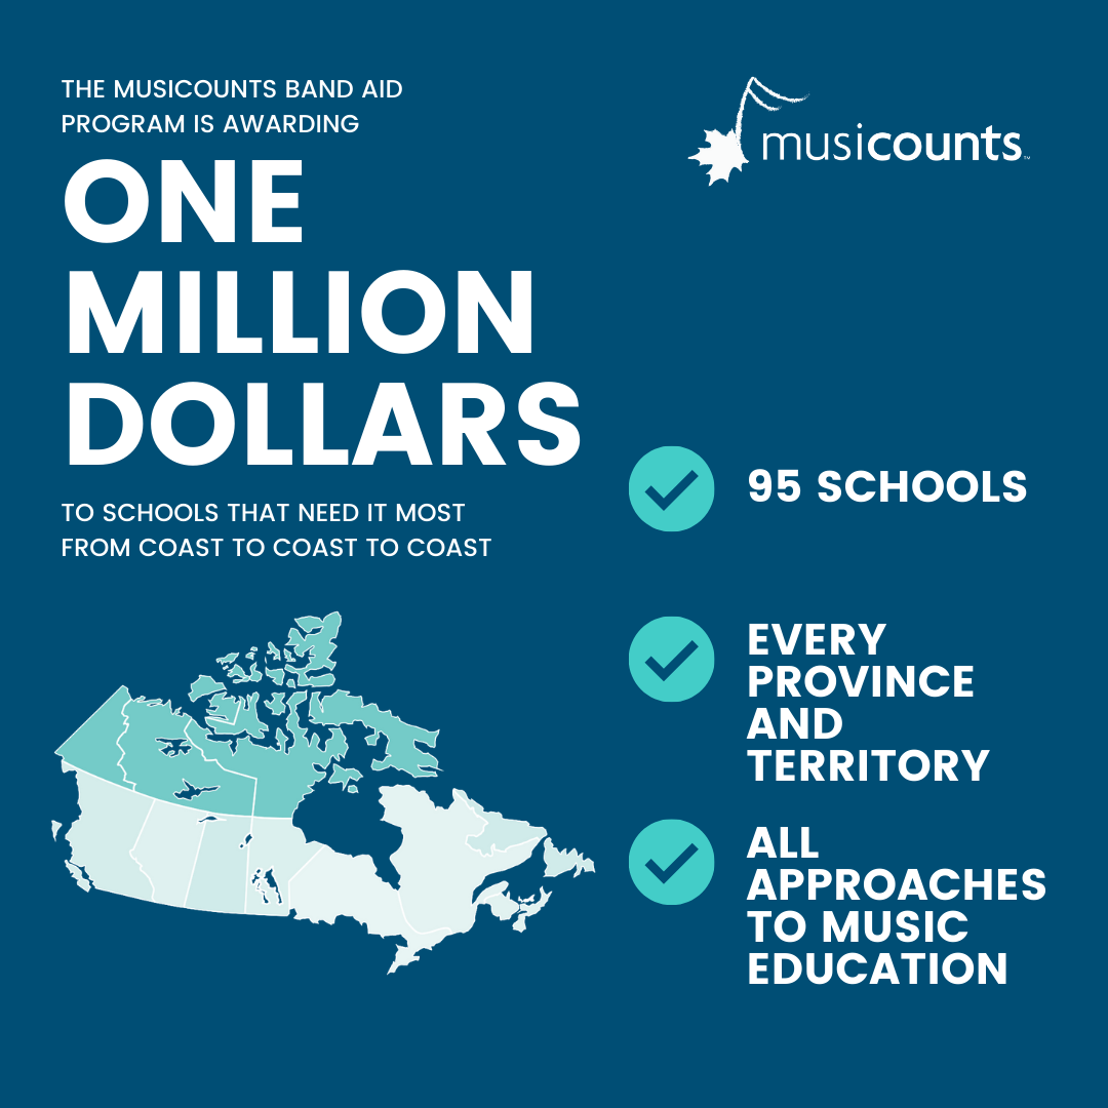 MusiCounts Awards $1 Million in Musical Instruments to 95 Schools Across Canada